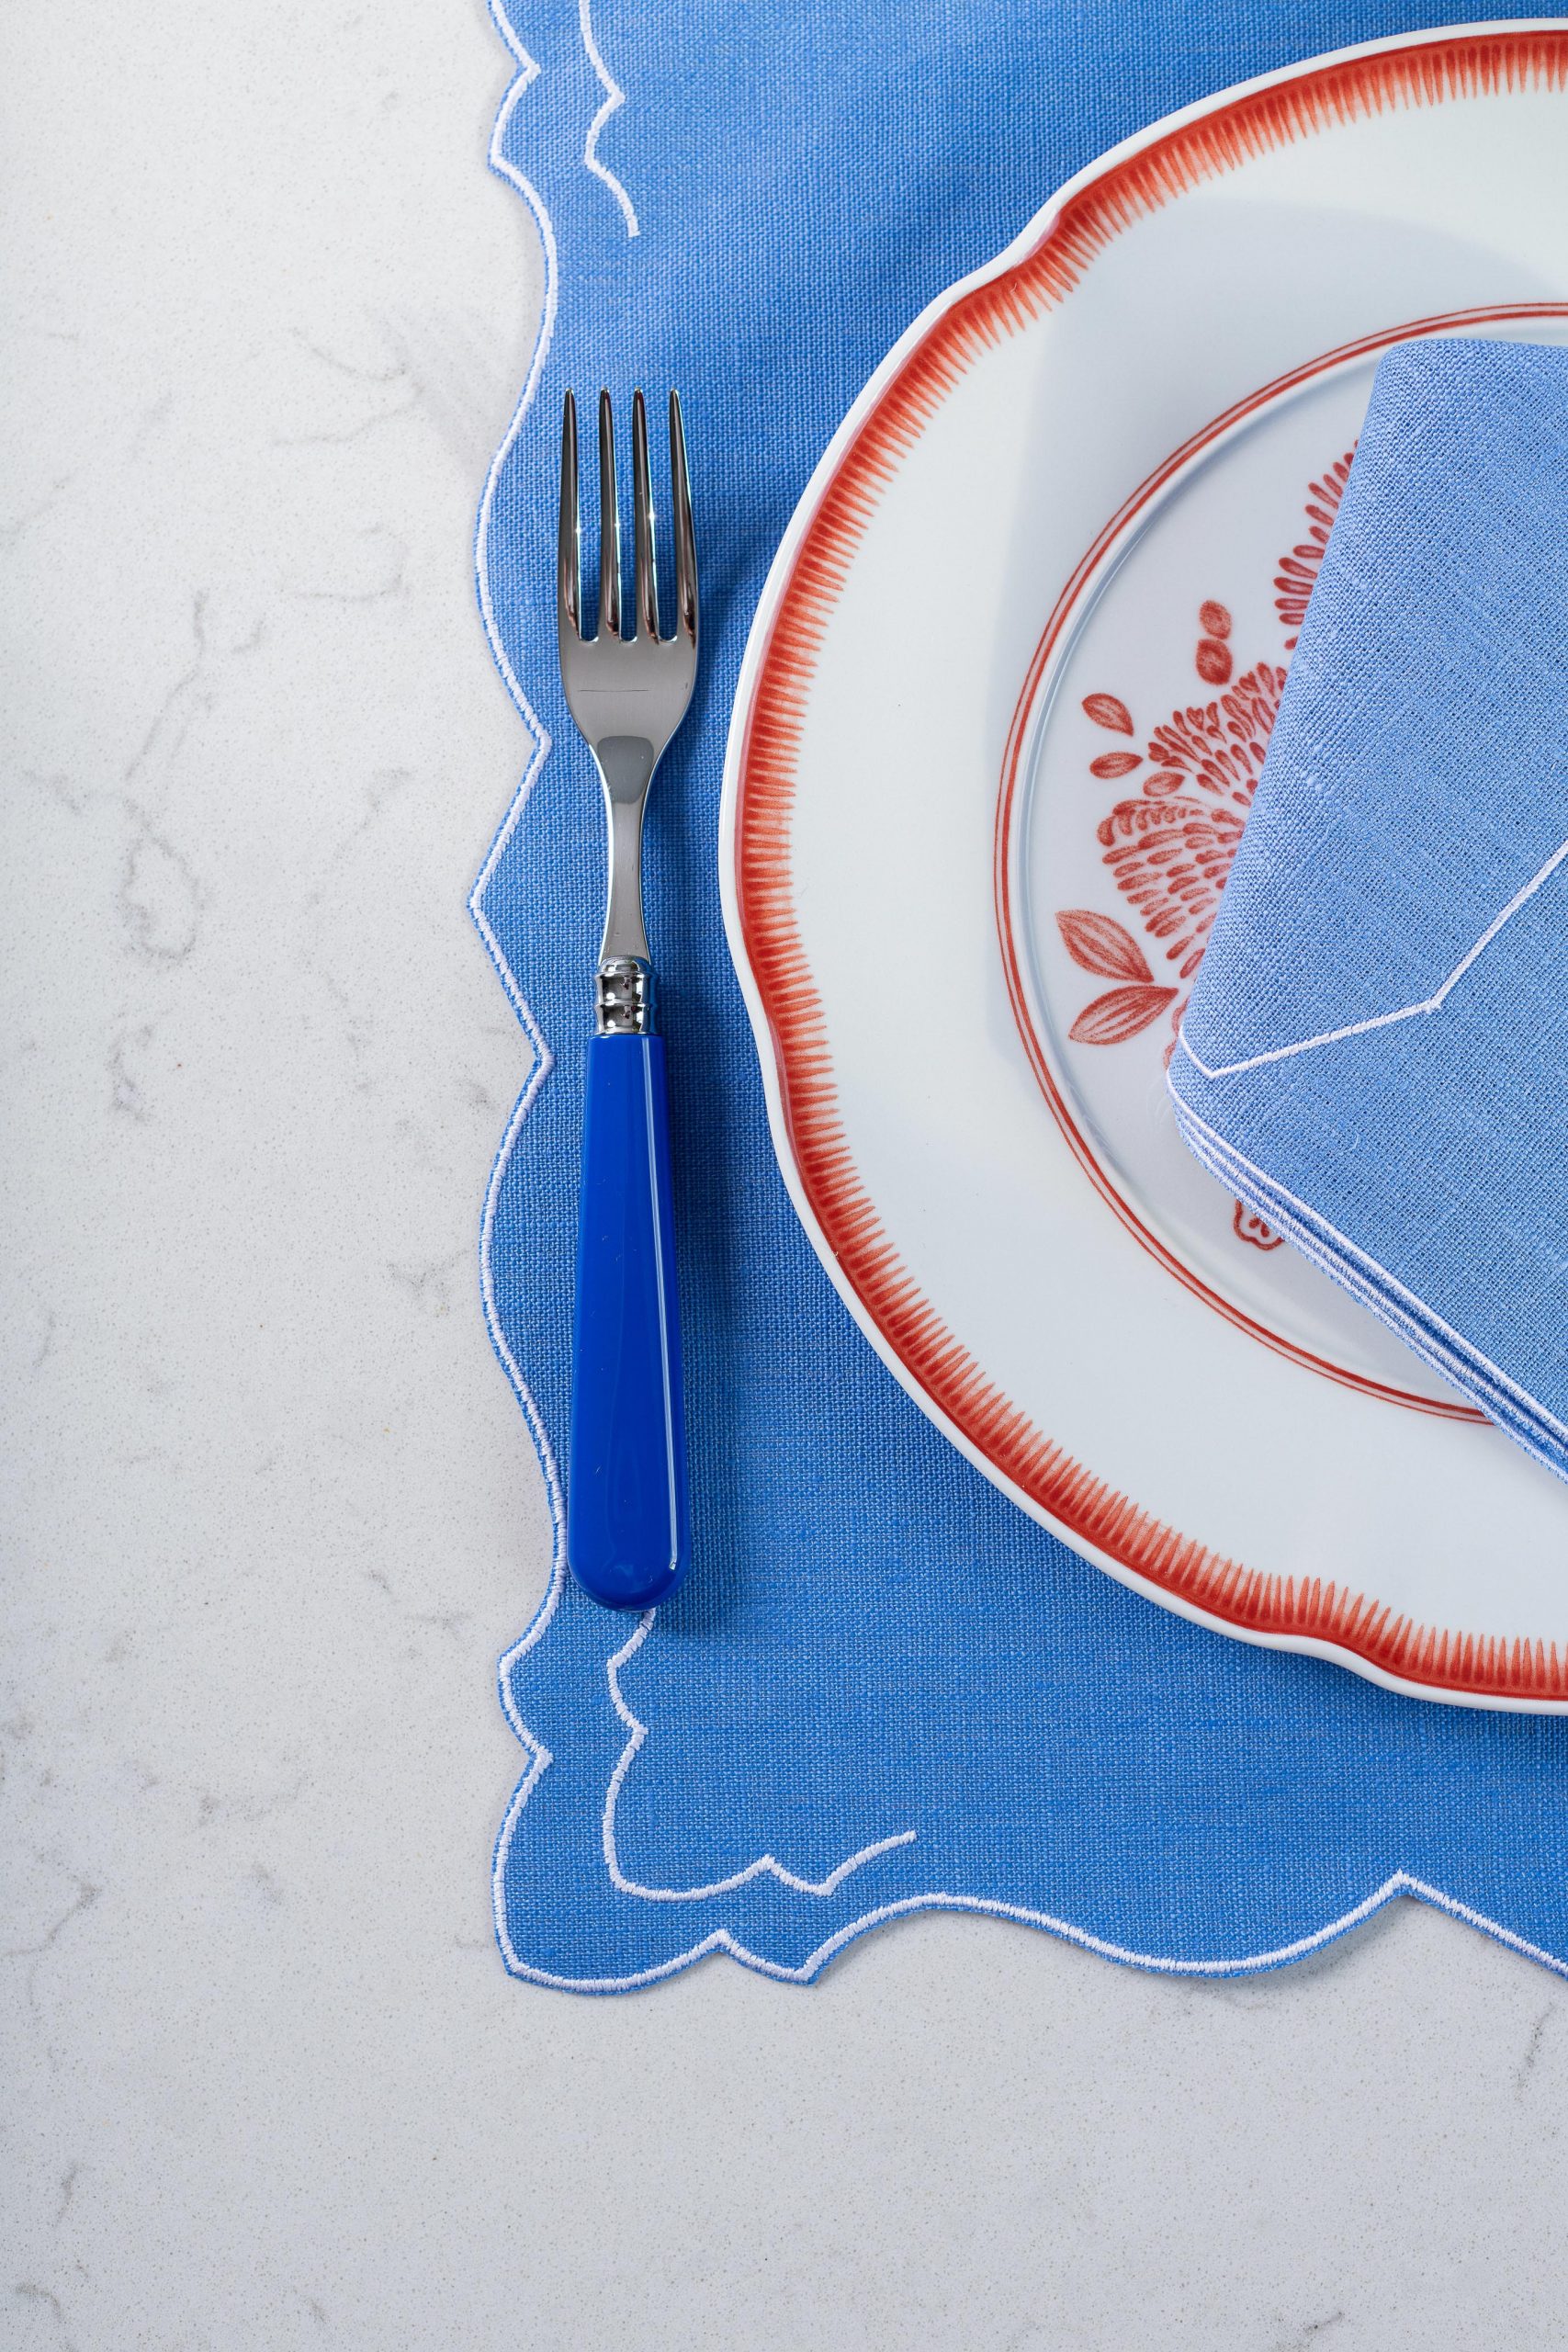 Embroidered Italian linen placemat - Marina blue with white trim - Signature Editions